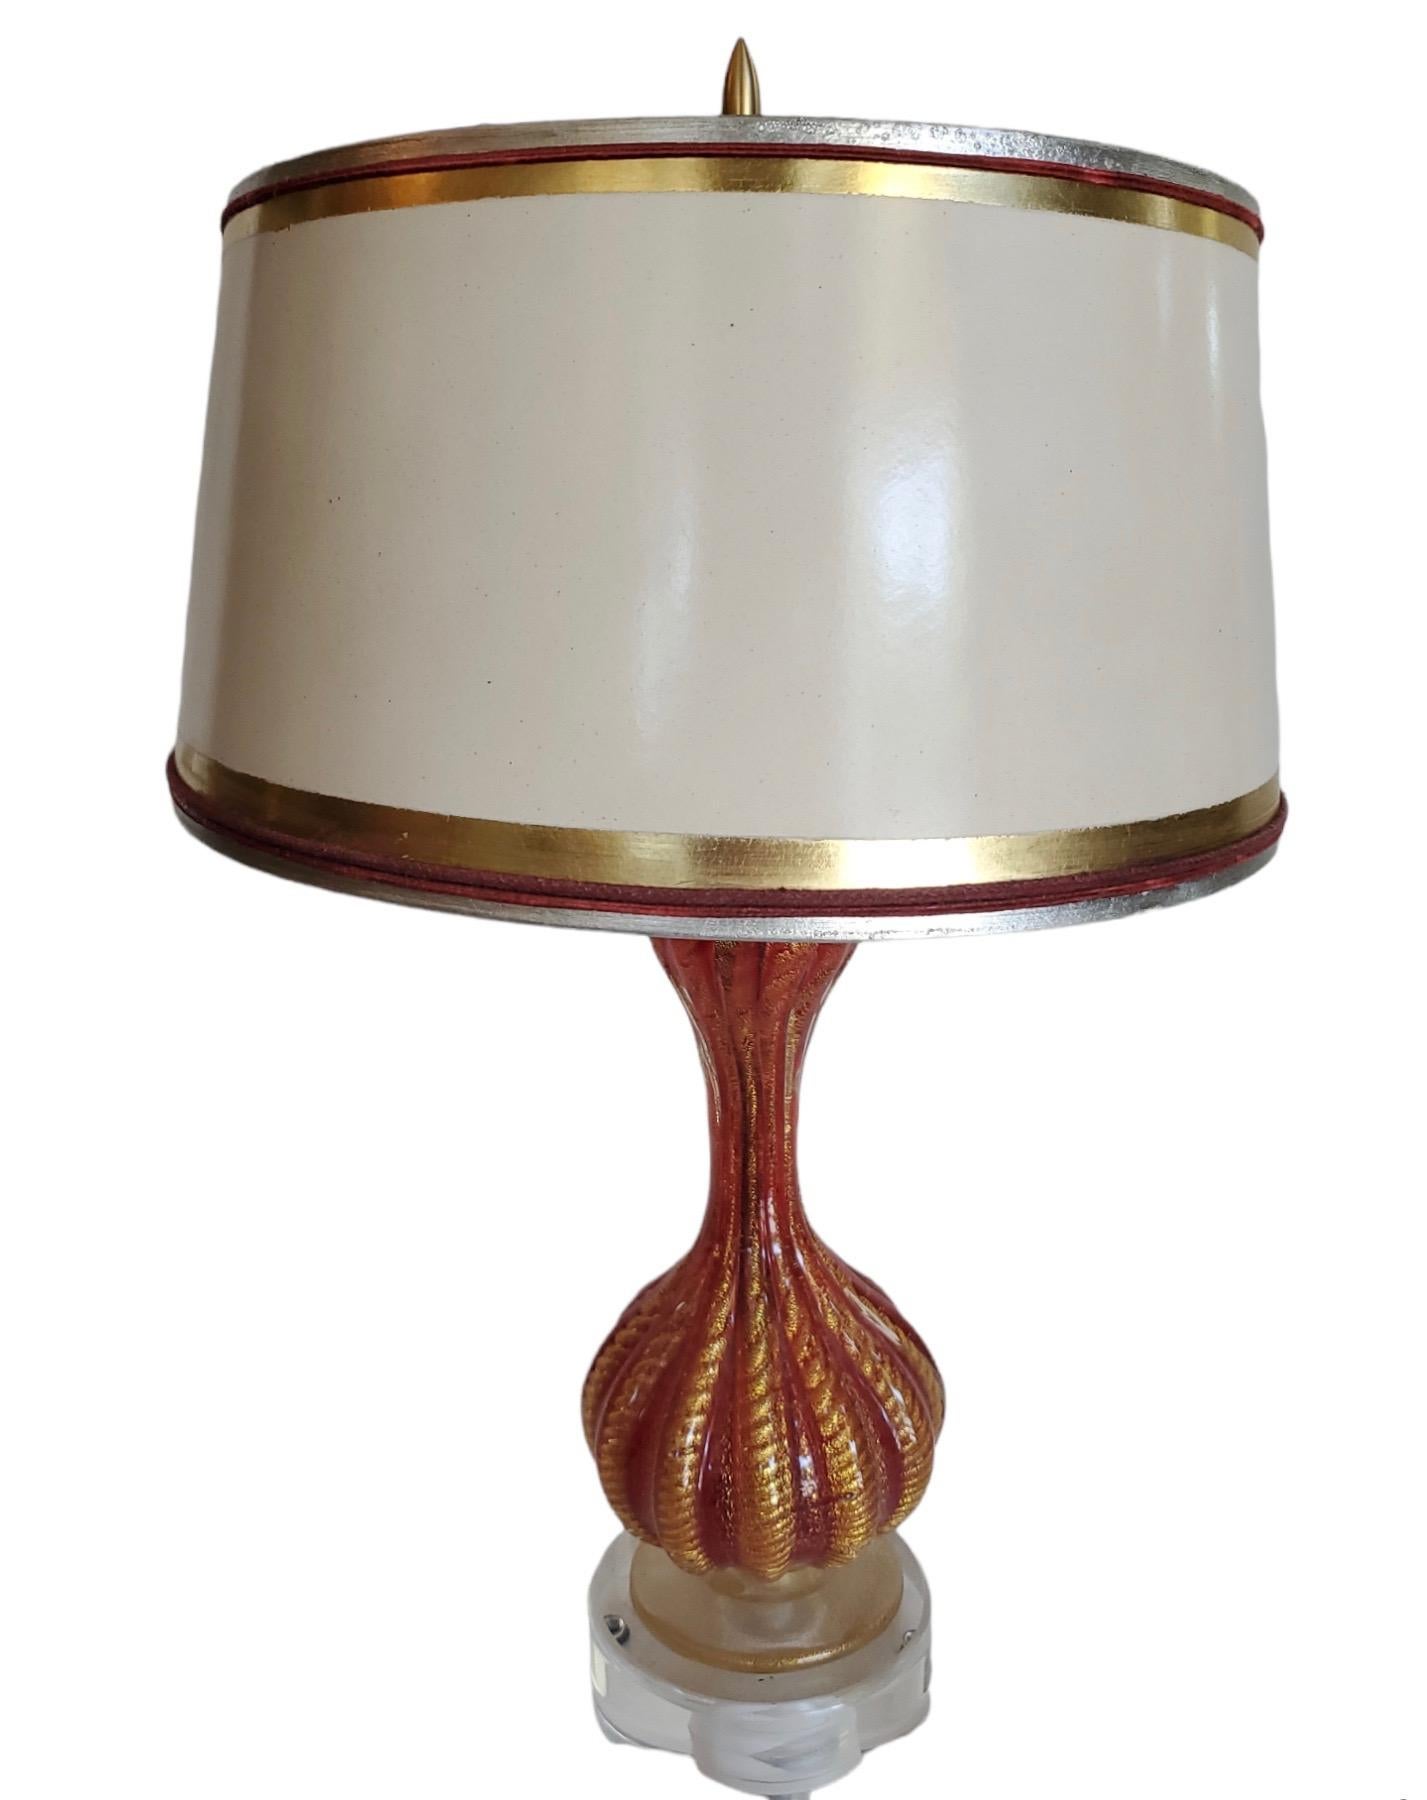 MId-Century Modern Murano lamp. Beautiful red color with heavy amounts of gold throughout. Custom parchment shade is 6.5